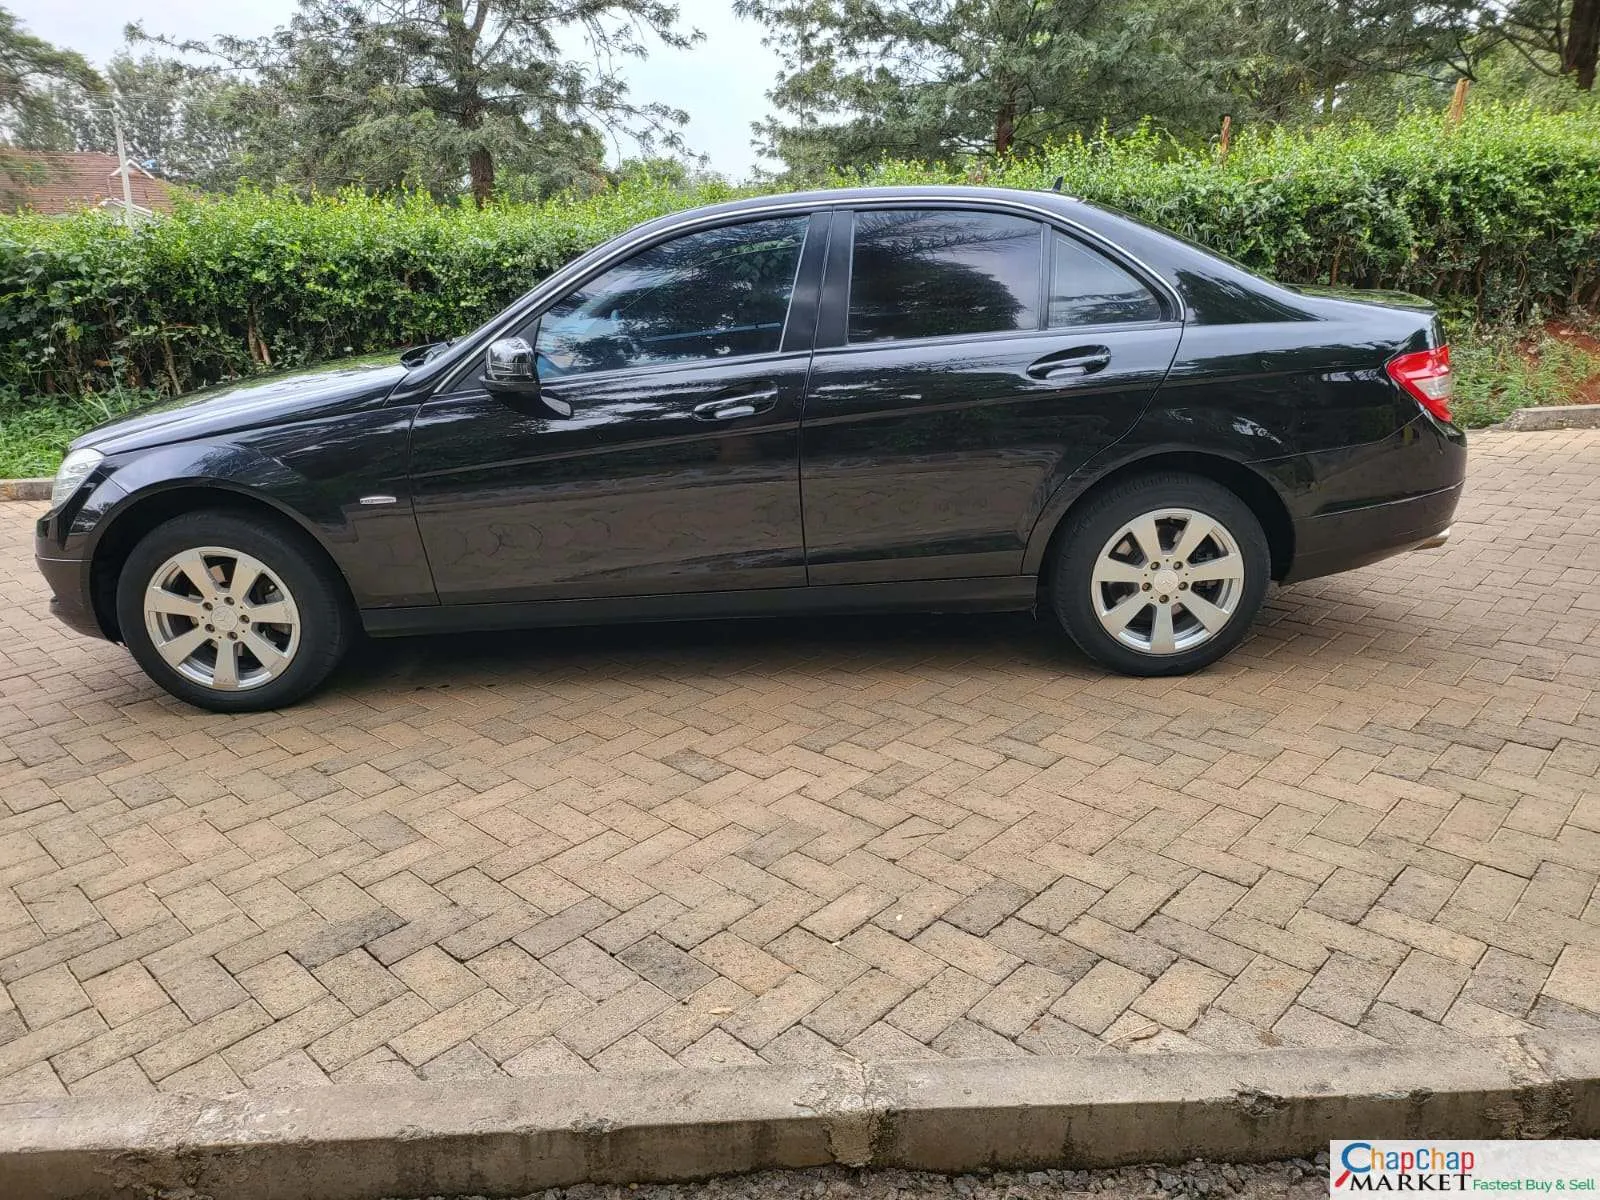 [Sub-categories]-Mercedes Benz C200 for sale in Kenya 🔥 You Pay 30% DEPOSIT Trade in OK EXCLUSIVE Hire Purchase 9